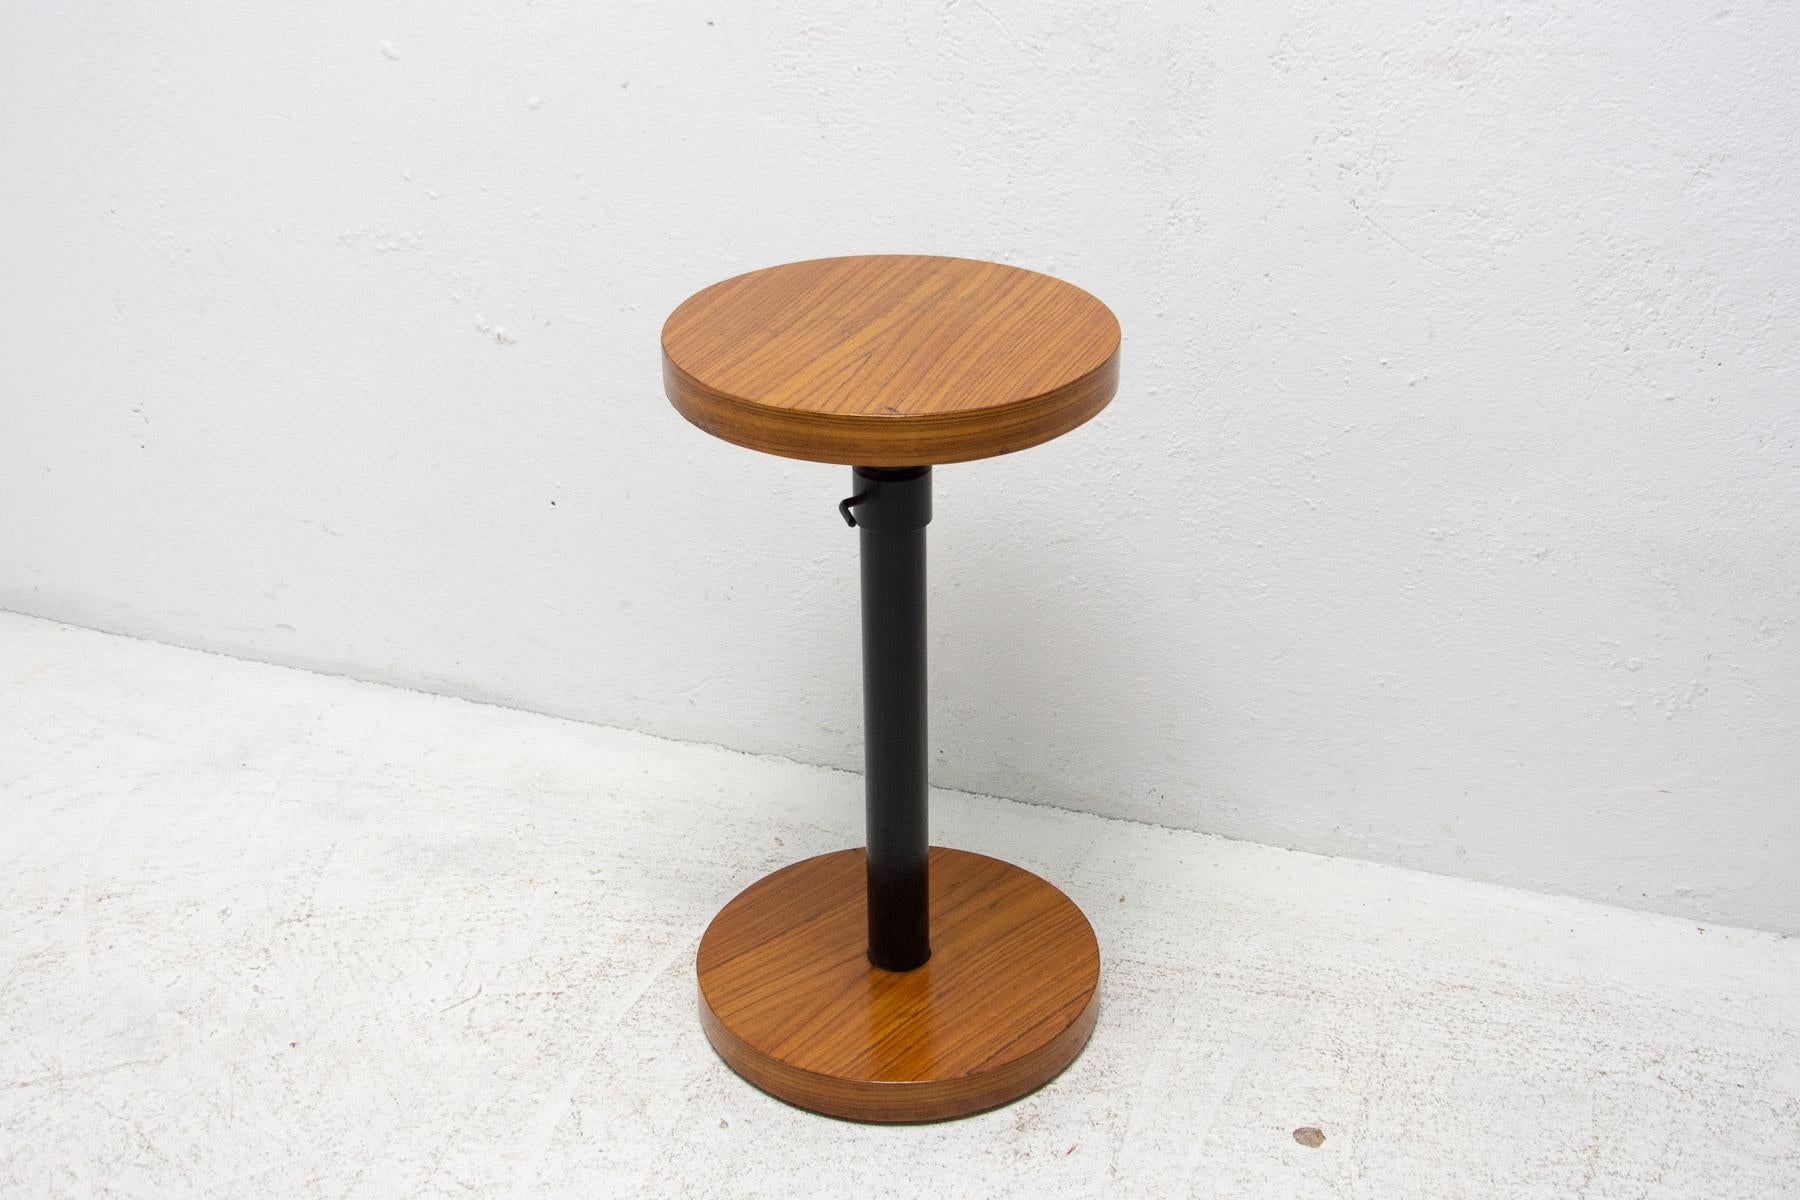 This occasional positioning side table or plant stand was made in the former Czechoslovakia in the 1930´s. It was made of cherry wood and iron. The height can be extended up to 93 cm. The table is completely refurbished and in great